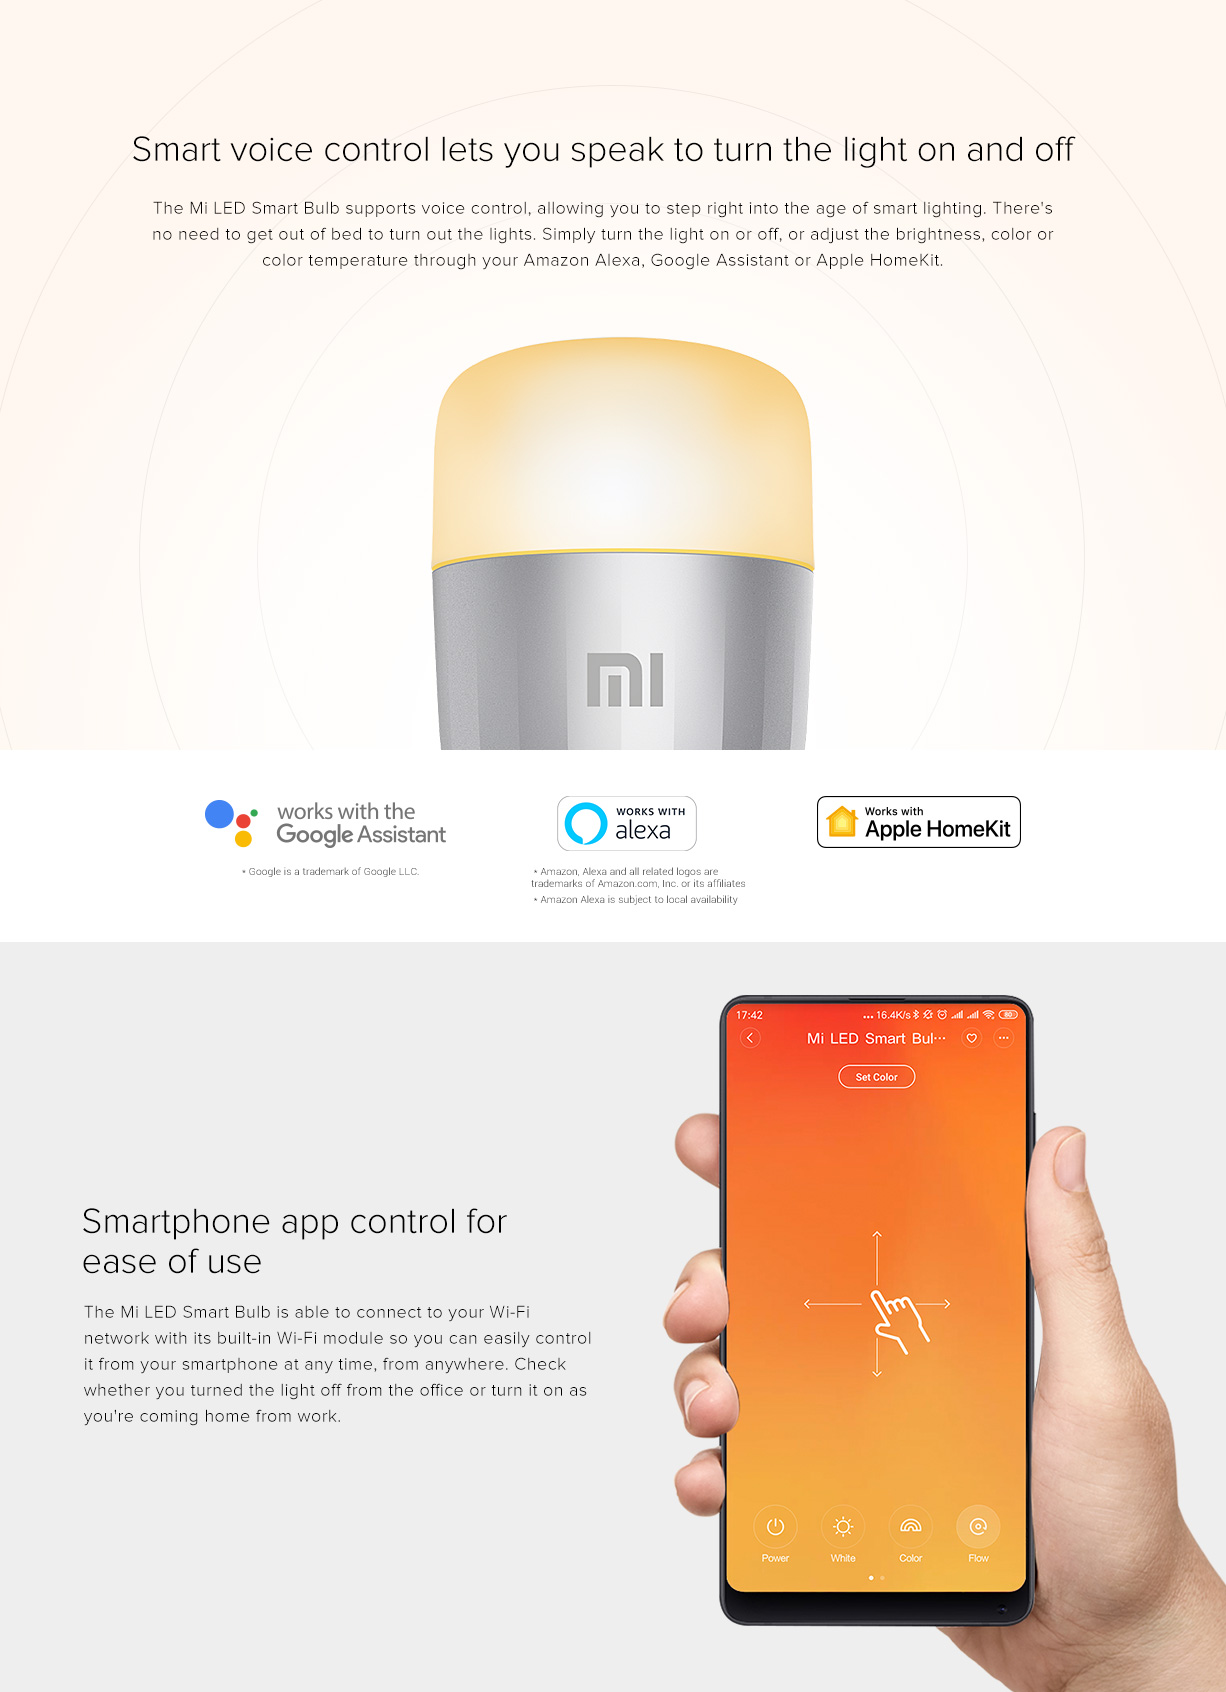 Mi Led Smart Bulb Pc 1226 03 Xiaomi Xiaomi Mi Smart Led Bulb Essential(White And Color) Wifi Remote Control Smart Light Work With Alexa And Google Assistant, Voice Control, Wifi Connection, Adjustable Color Temperature, Scheduled On/Off, Smart App Control Smart Bulb Xiaomi Mi Led Smart Bulb Essential Bulb (White And Color)(9W)